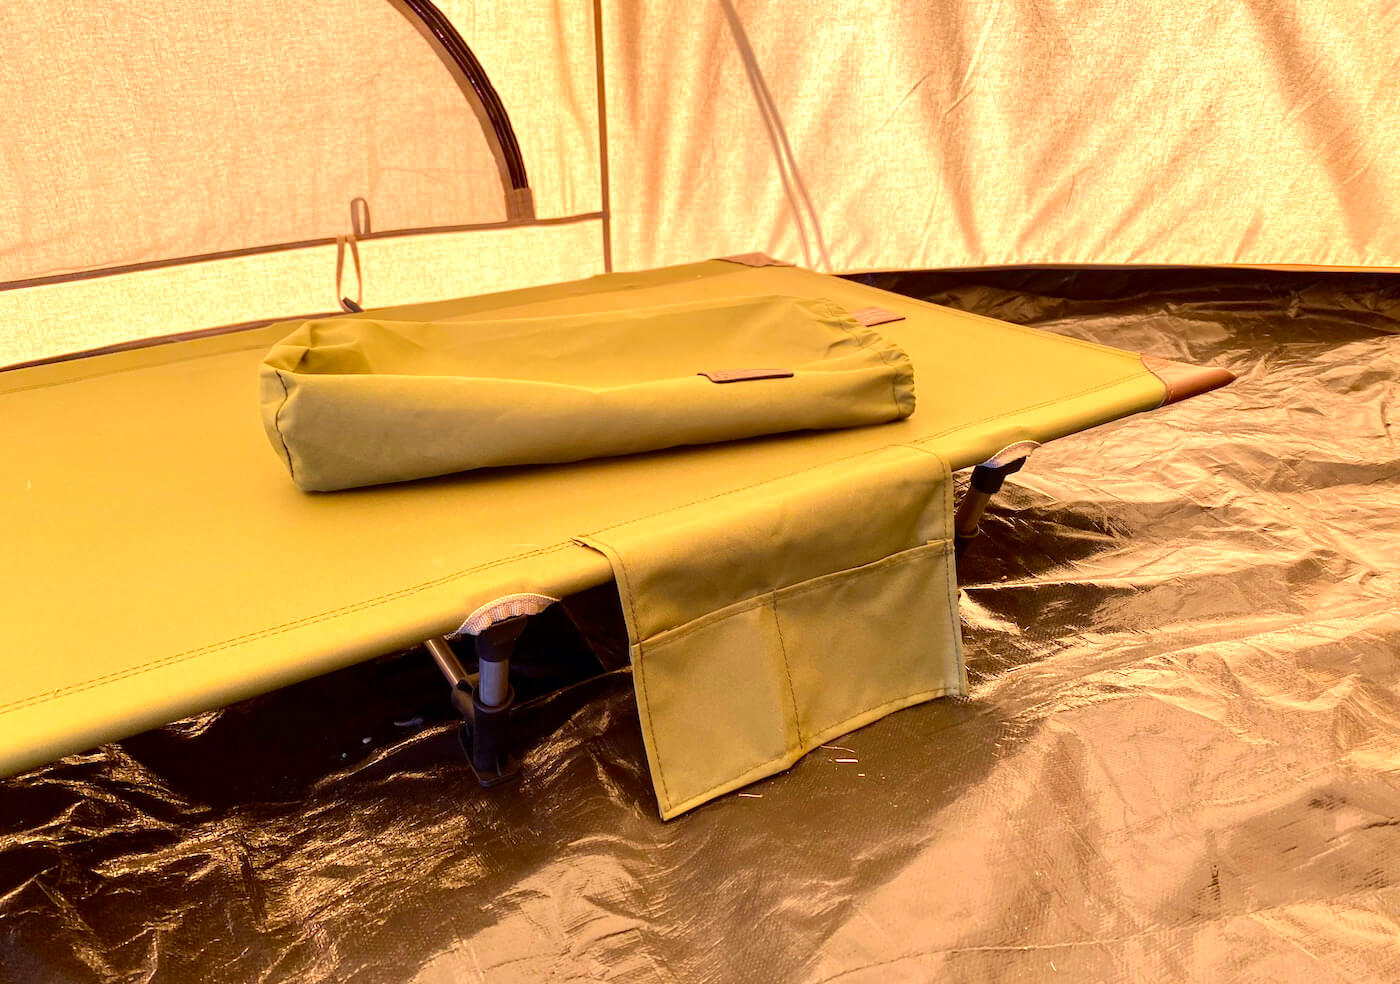 This review photo shows the Kijaro Native Ultralight Cot set up inside of a camping tent.